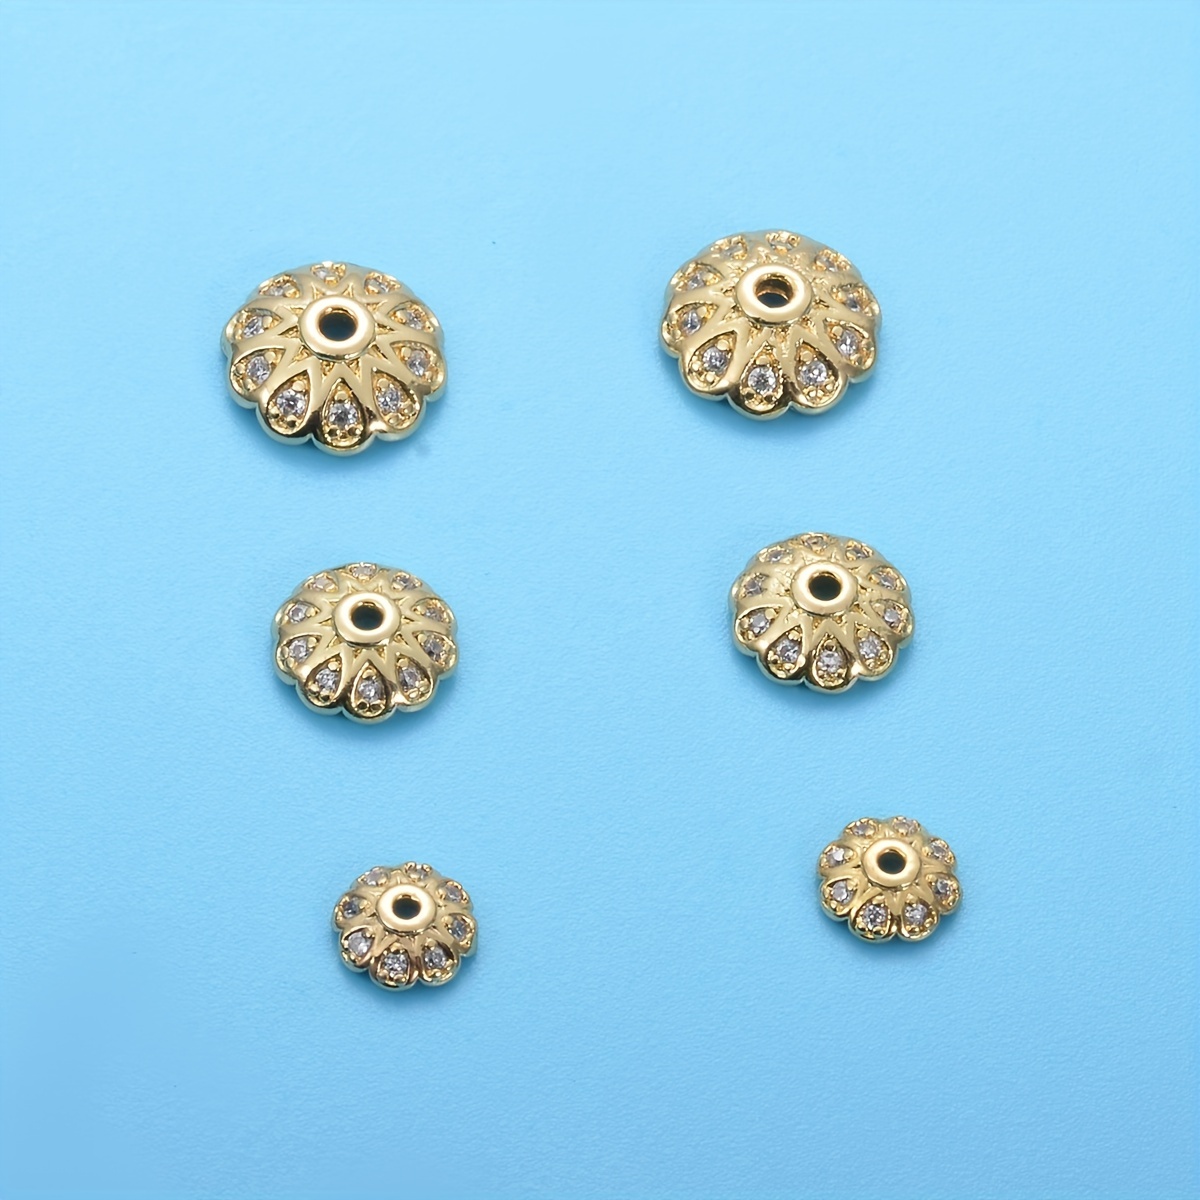 Bead Caps brass filigree jewellery making spacers components